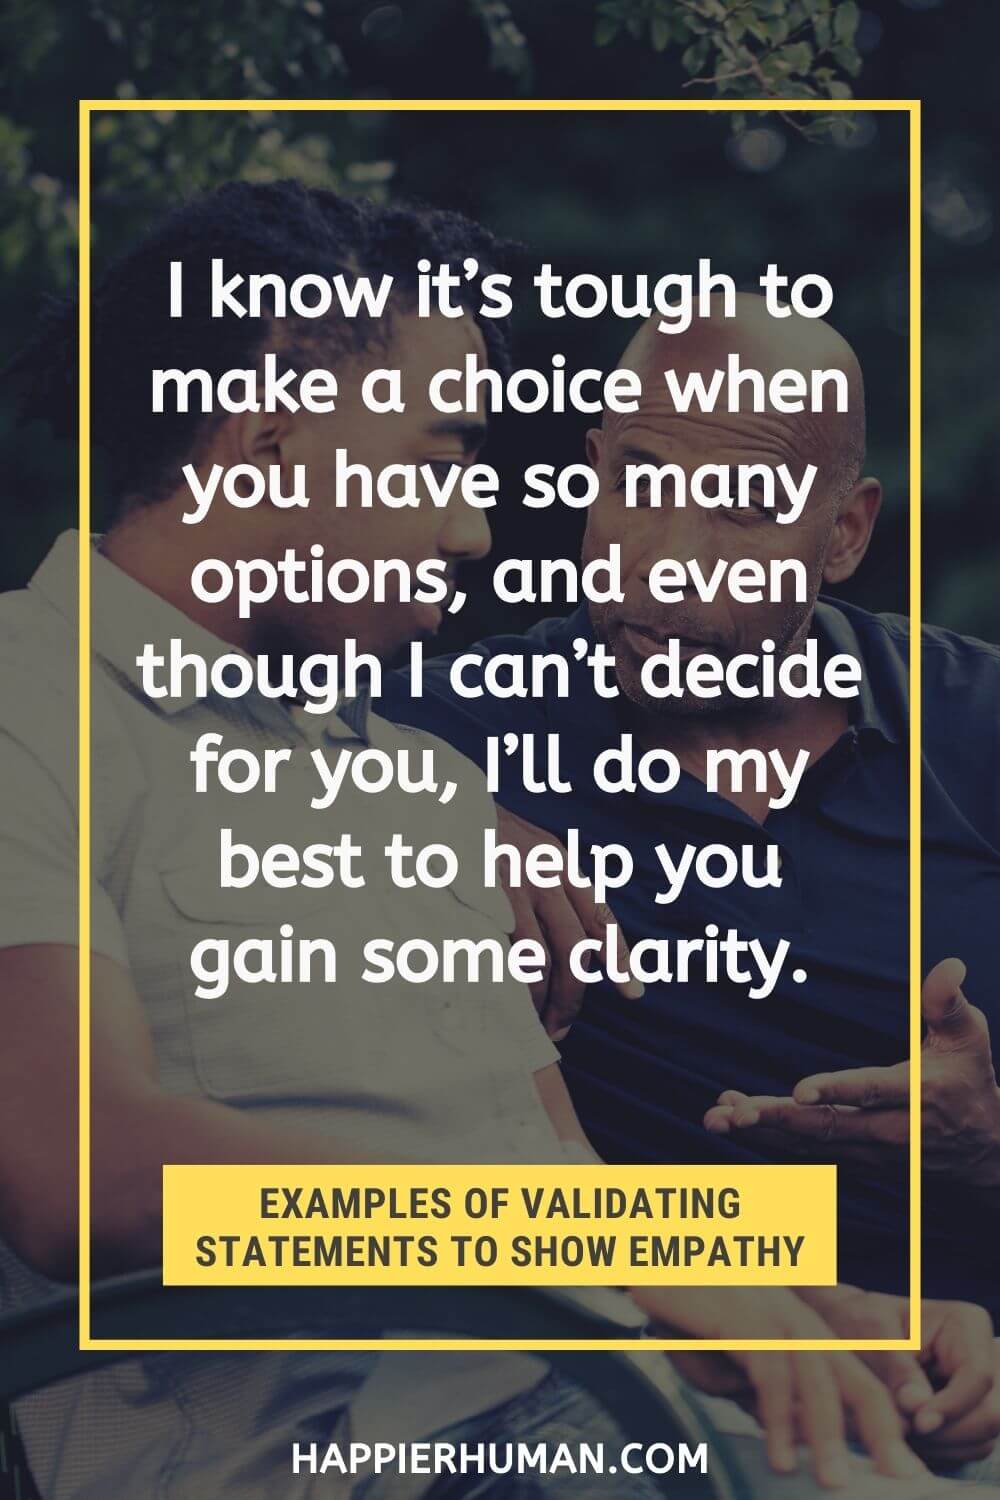 Validating Statements - I know it’s tough to make a choice when you have so many options, and even though I can’t decide for you, I’ll do my best to help you gain some clarity. | validating statements pdf | validating statements to others | self validating statements